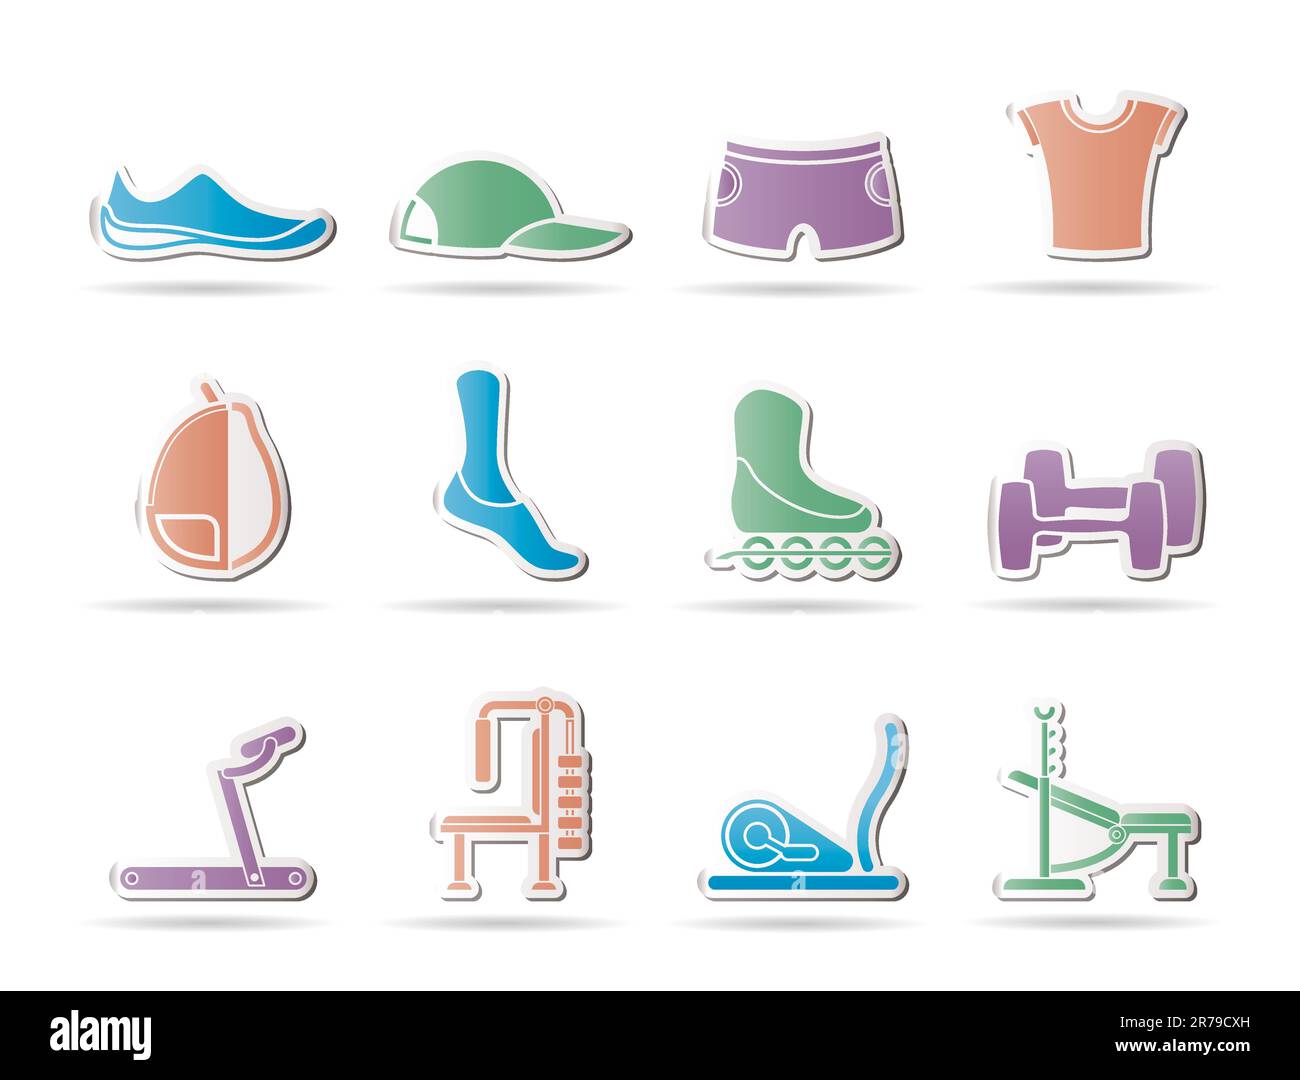 sports equipment and objects icons - vector icon set 1 Stock Vector